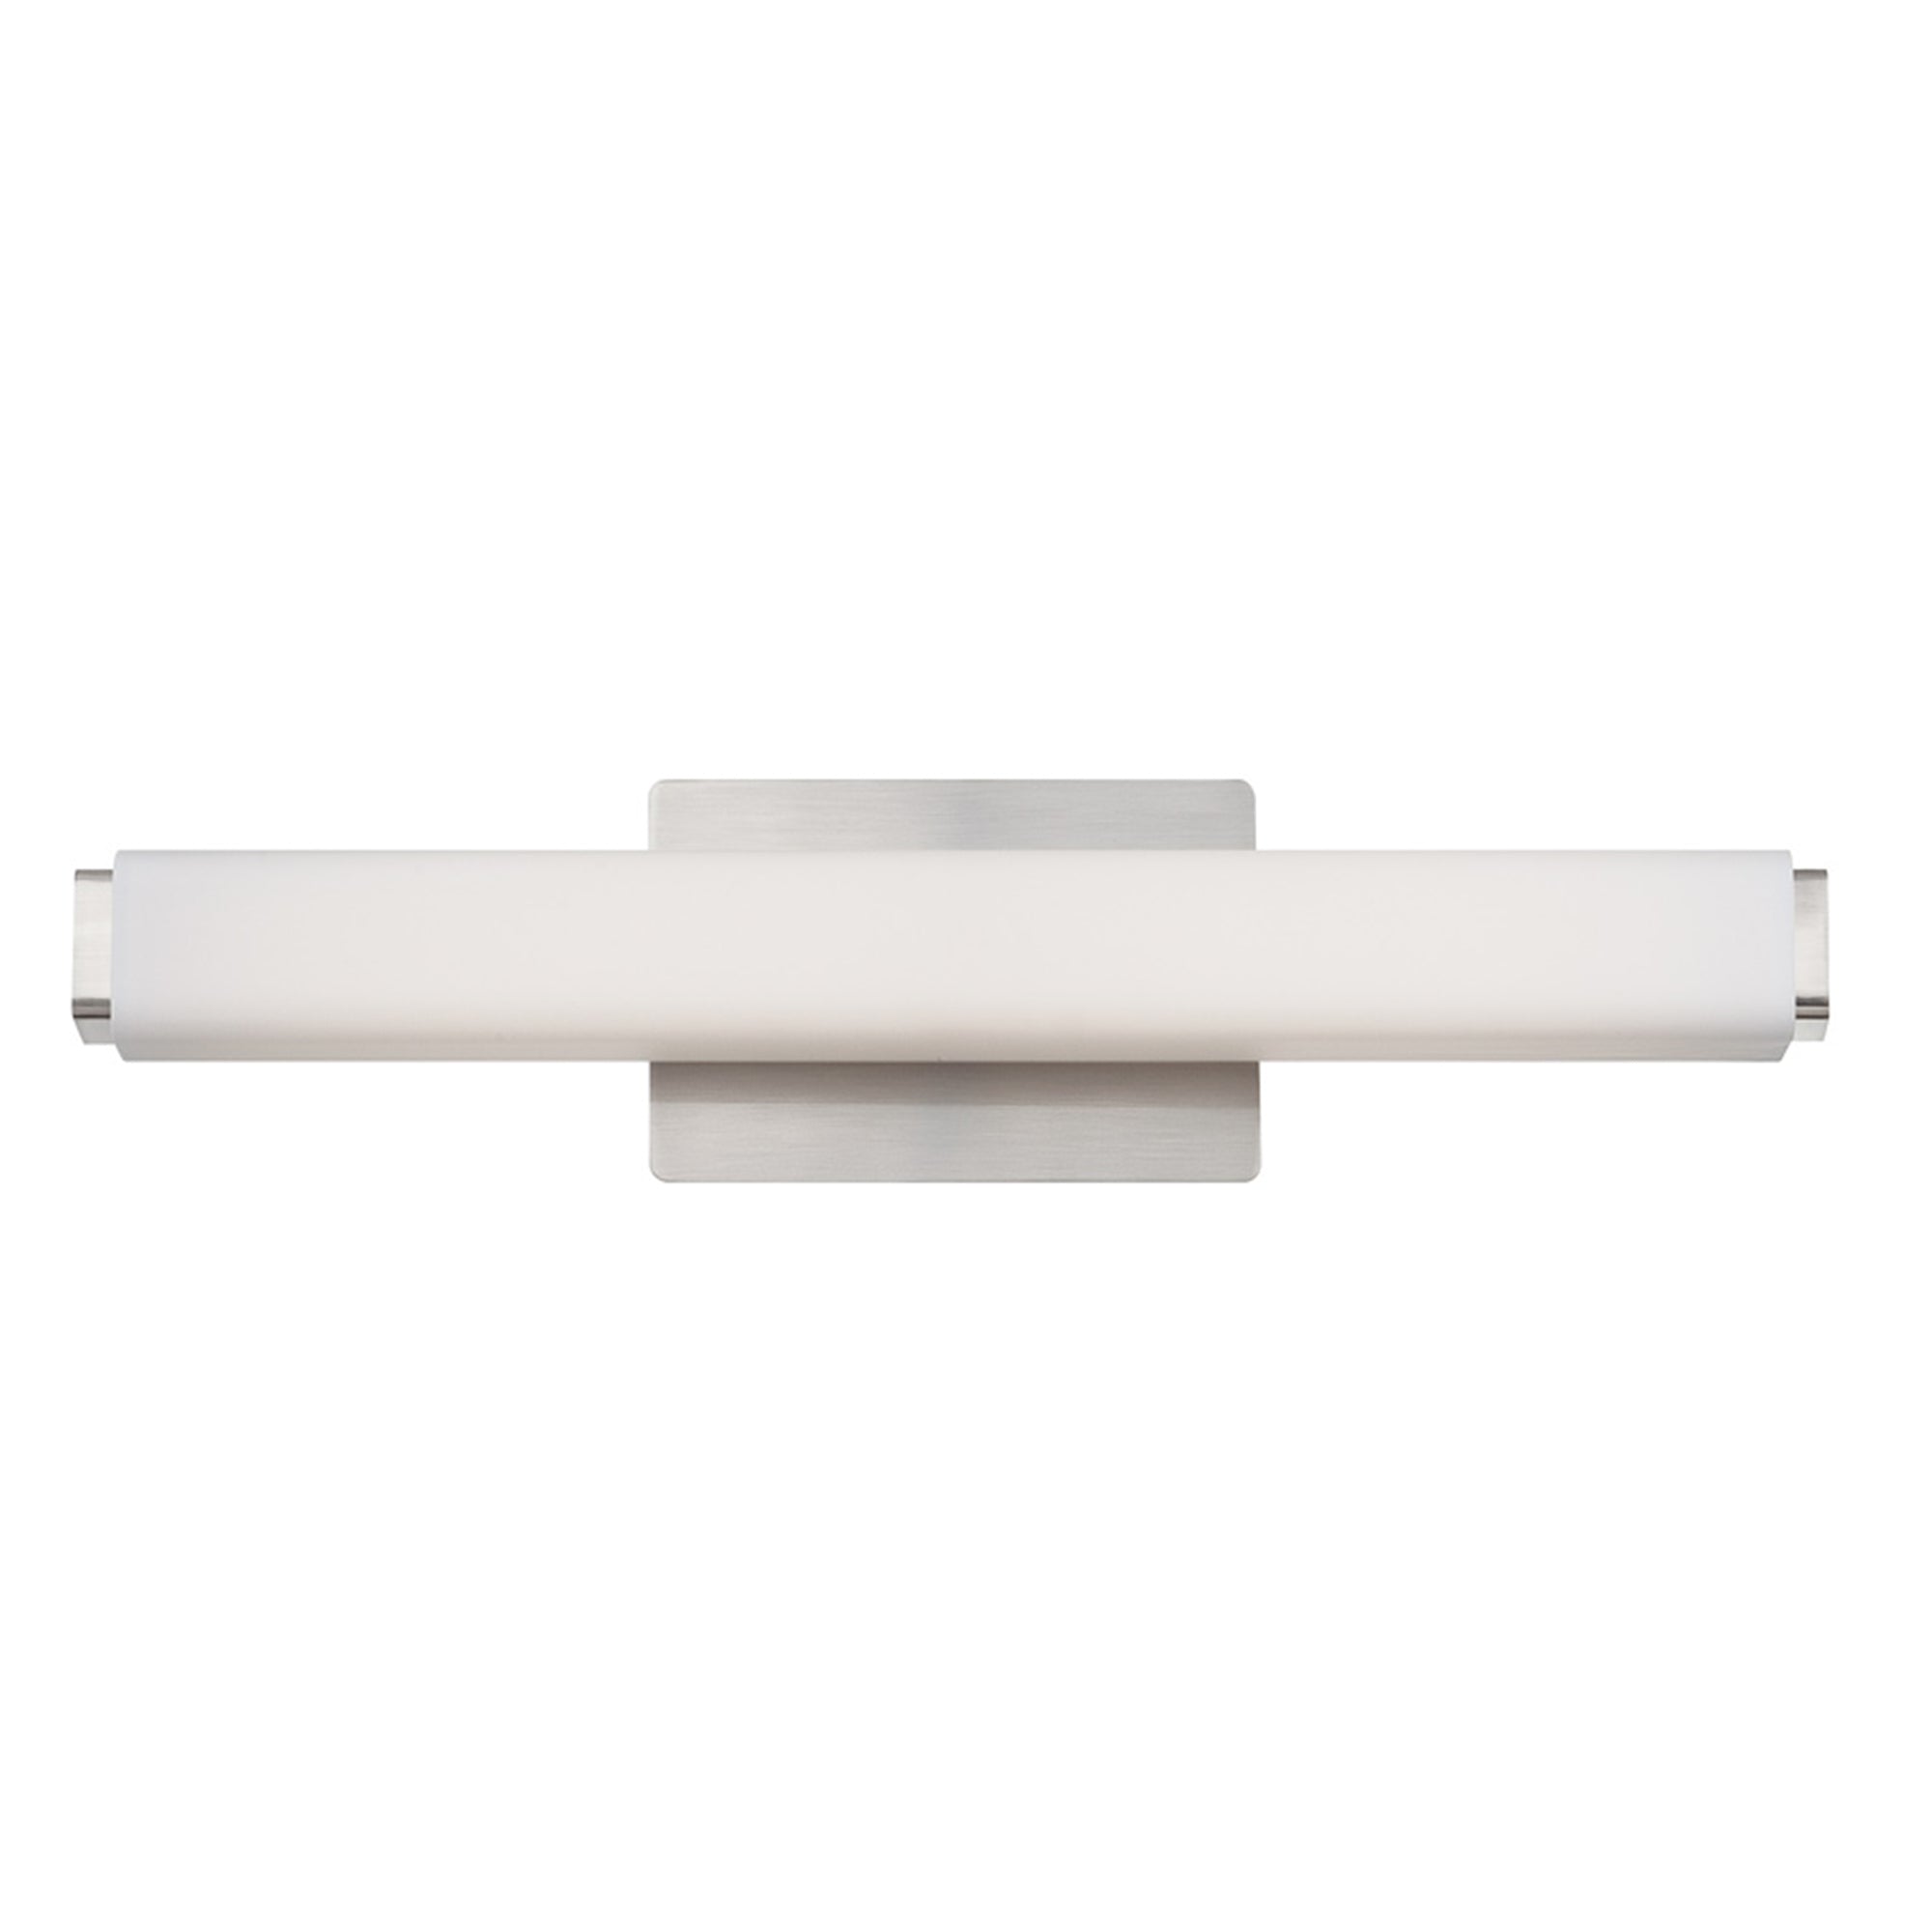 VOGUE Bathroom sconce Nickel INTEGRATED LED - WS-3120-35-BN | MODERN FORMS